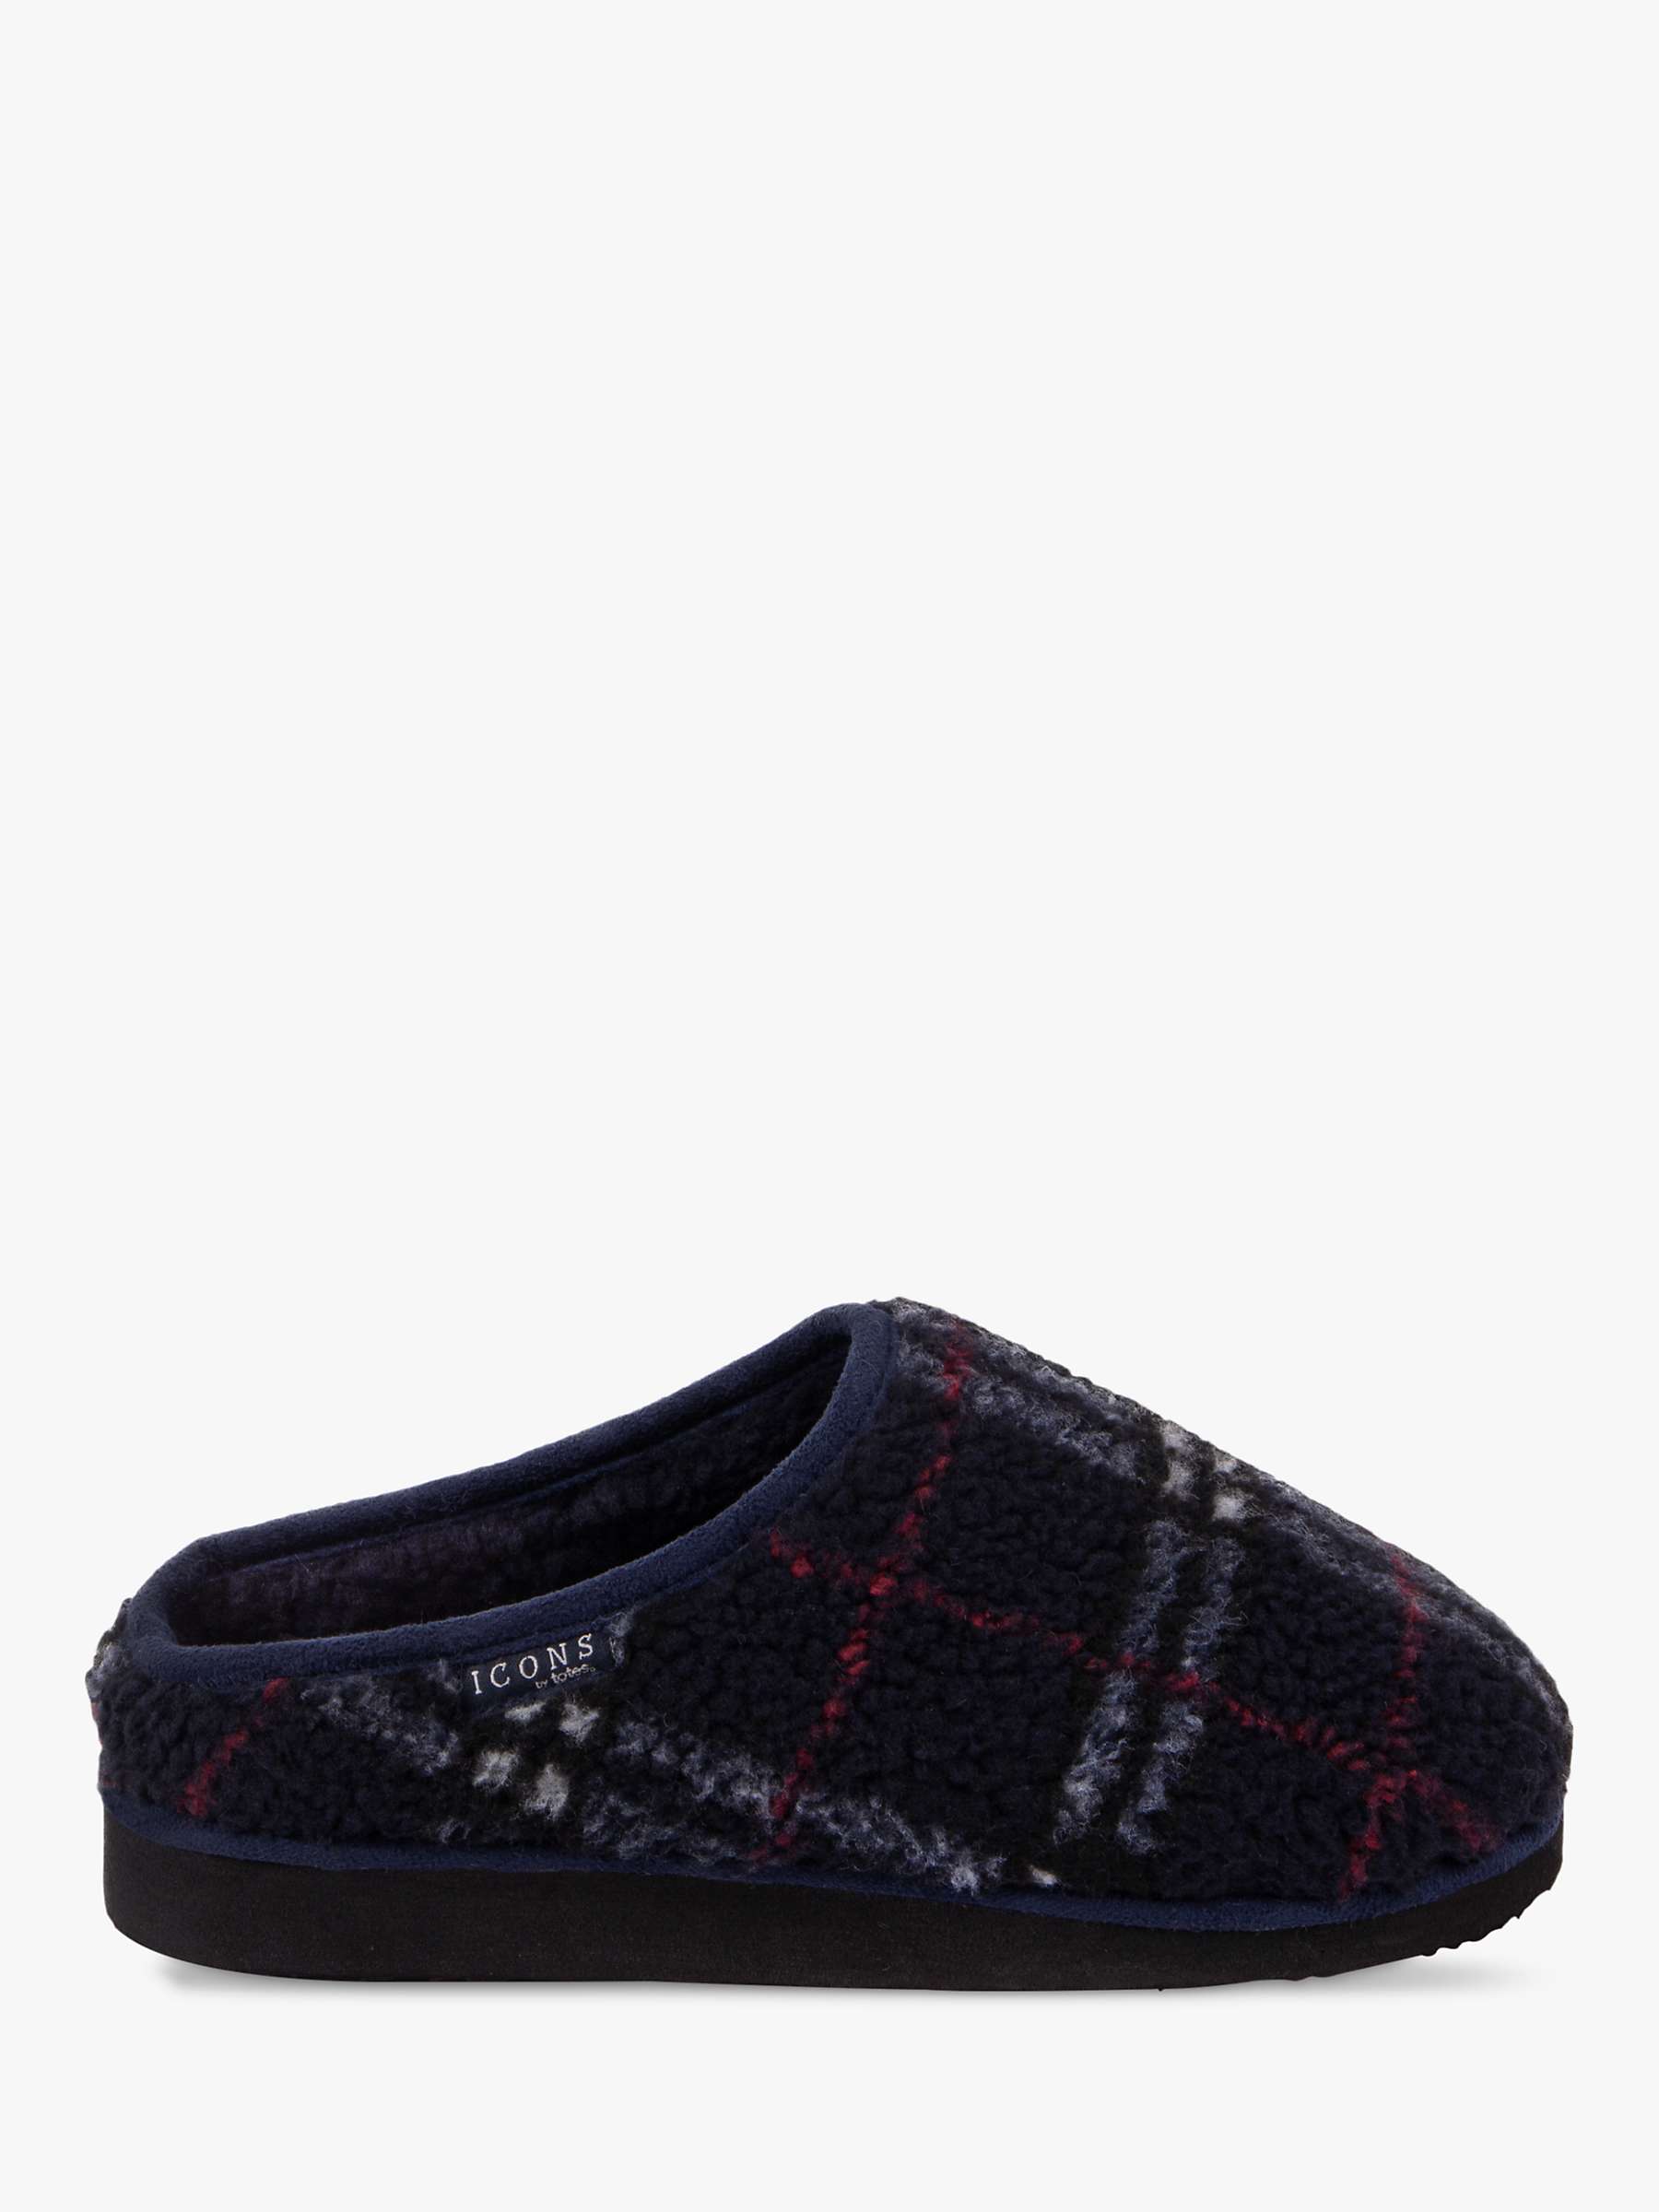 Buy totes Kids' Borg Check Mule Slippers, Navy Online at johnlewis.com